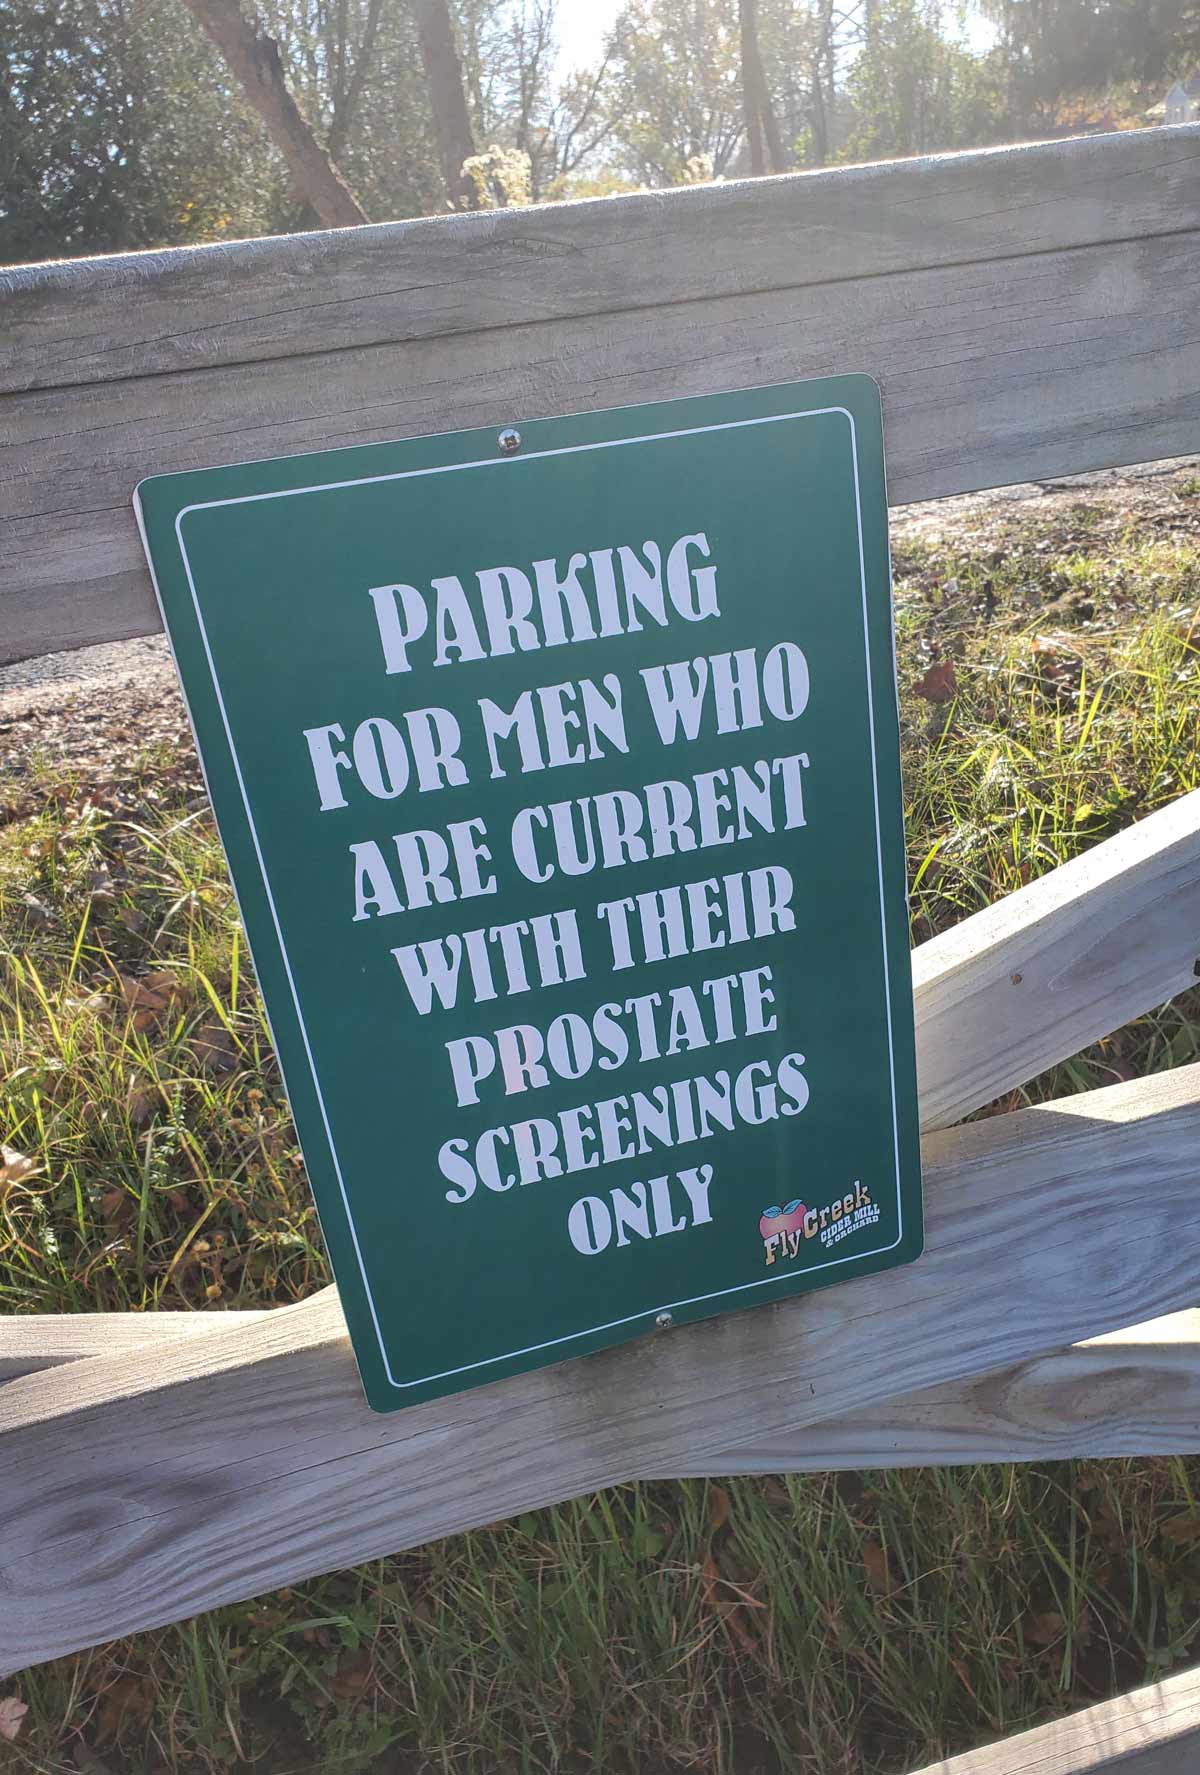 This parking sign at a cider mill